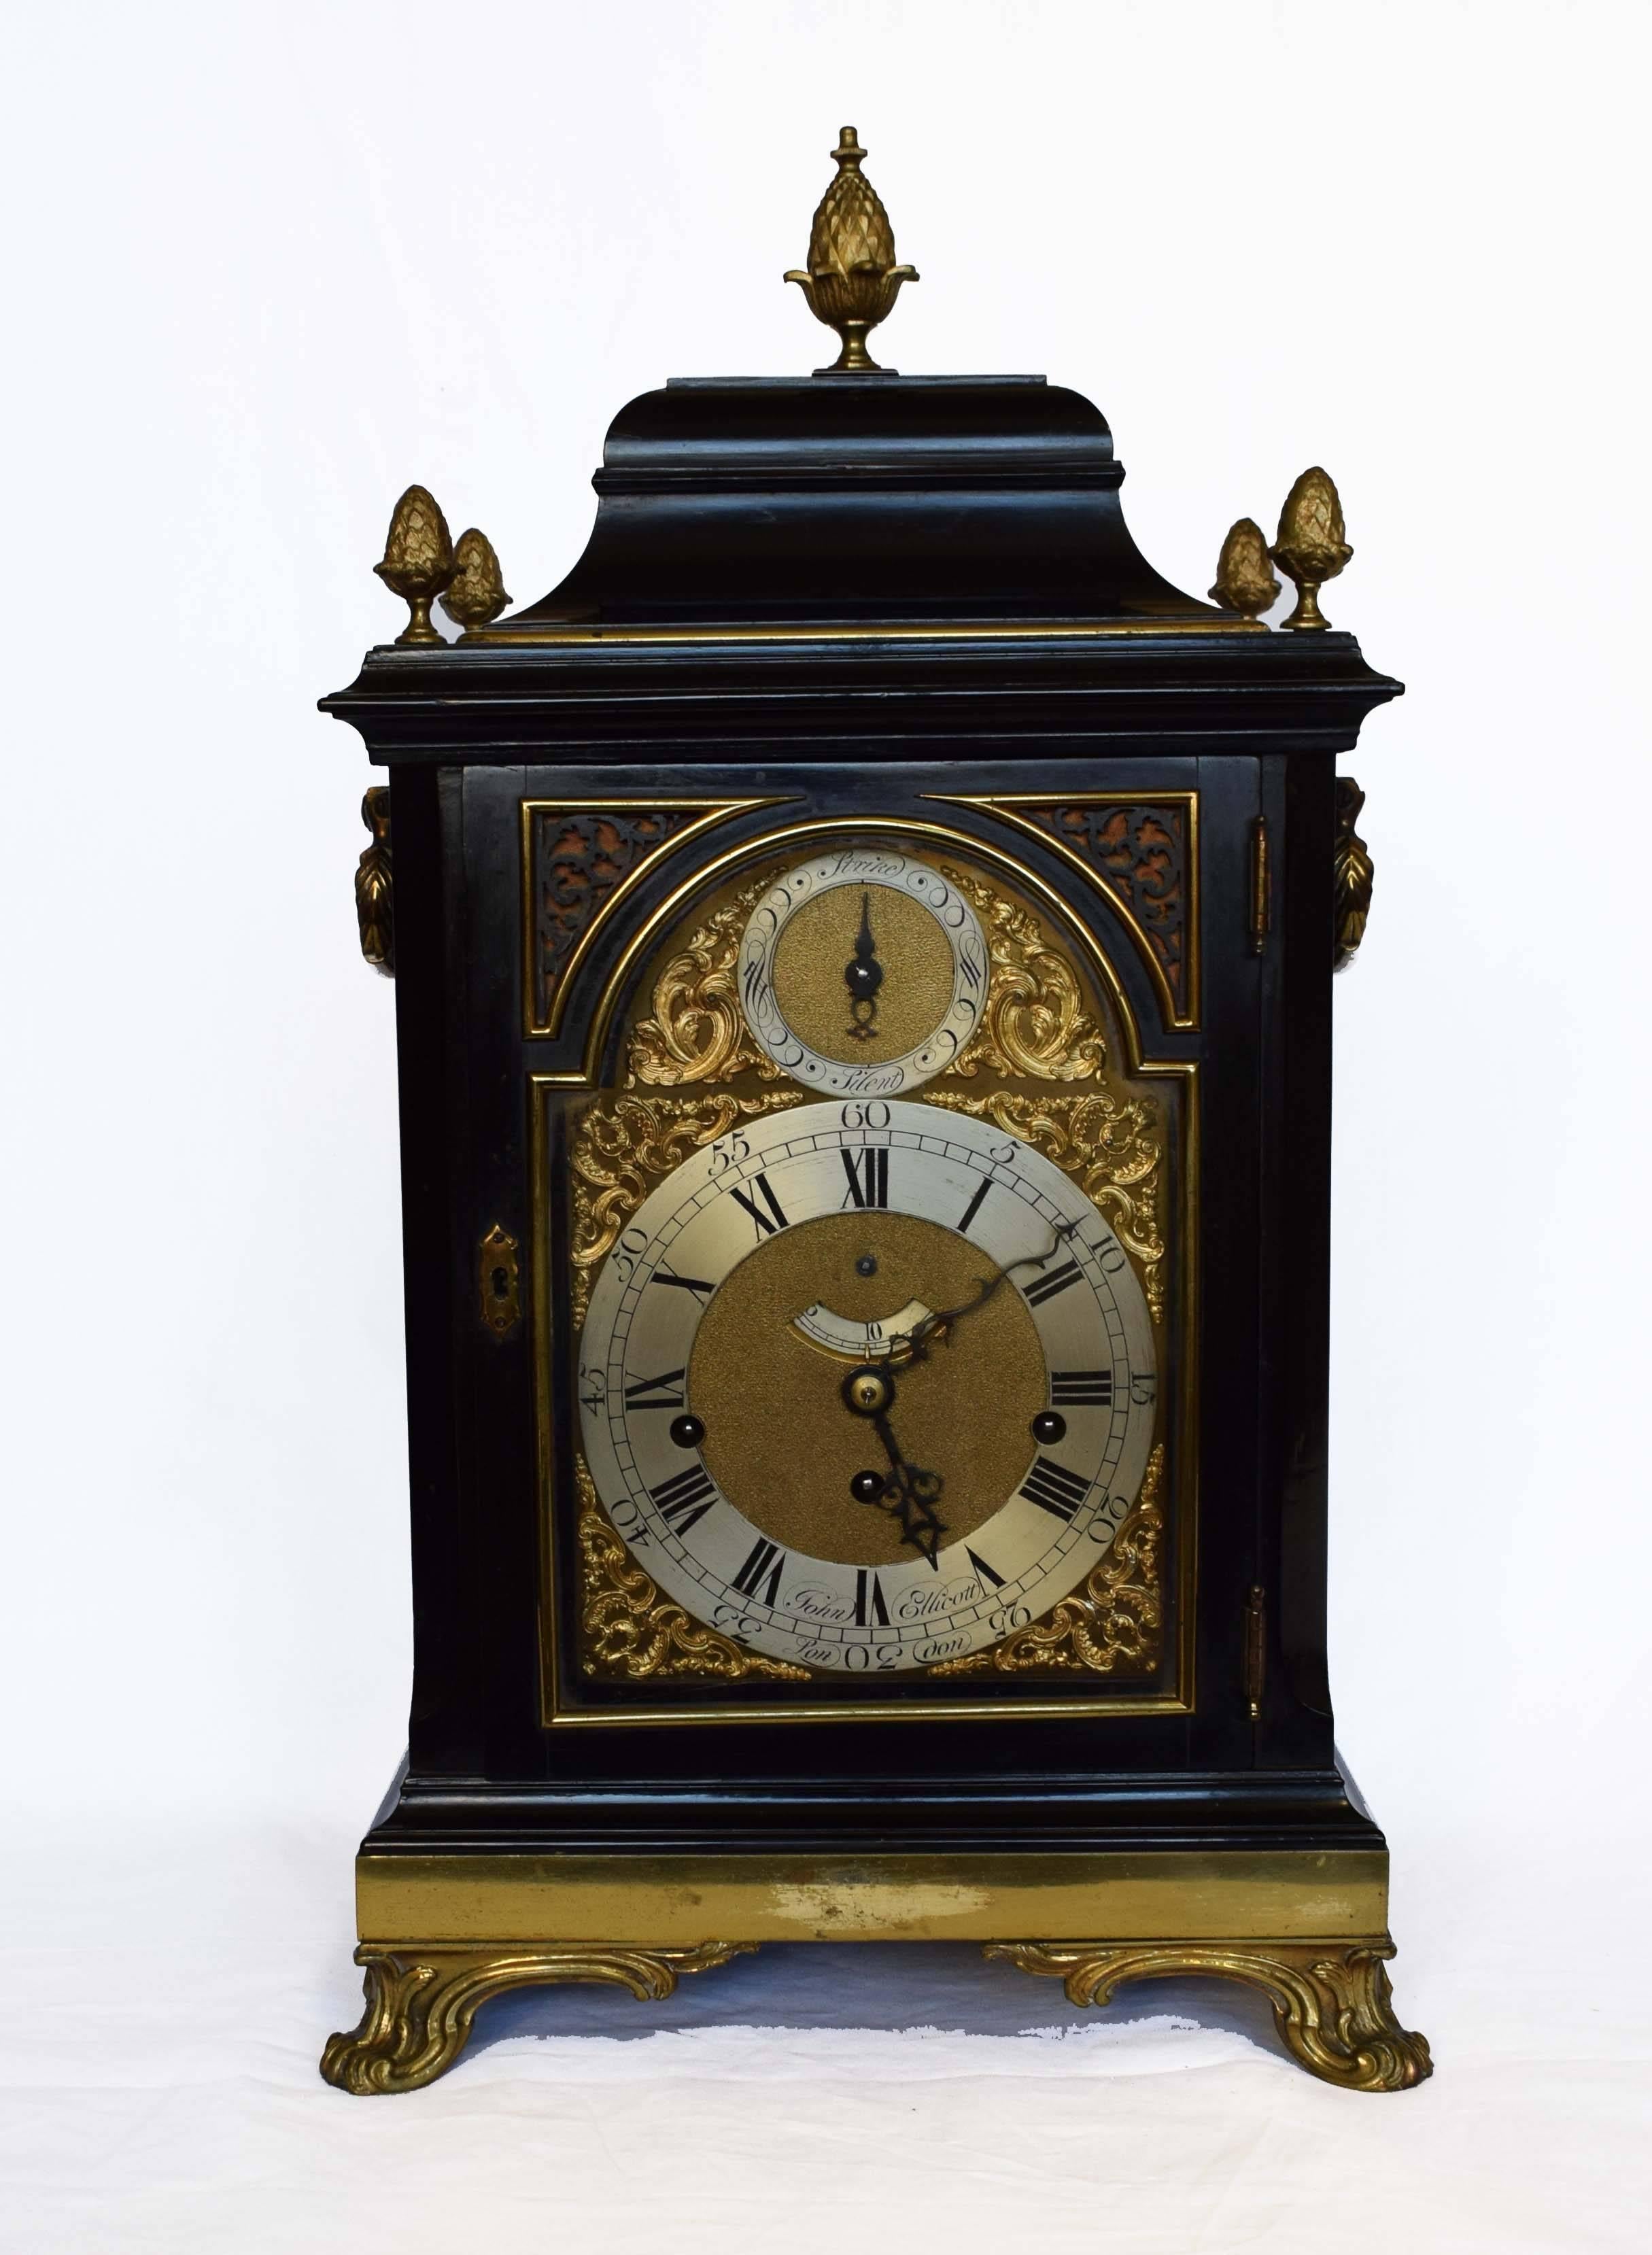 A fine and rare George III gilt brass-mounted ebonized quarter chiming bracket clock by John Ellicott (London, 1706-1772)

The bell top inset with five pineapple finials, over shaped glazed side apertures to a moulded base set with brass band and